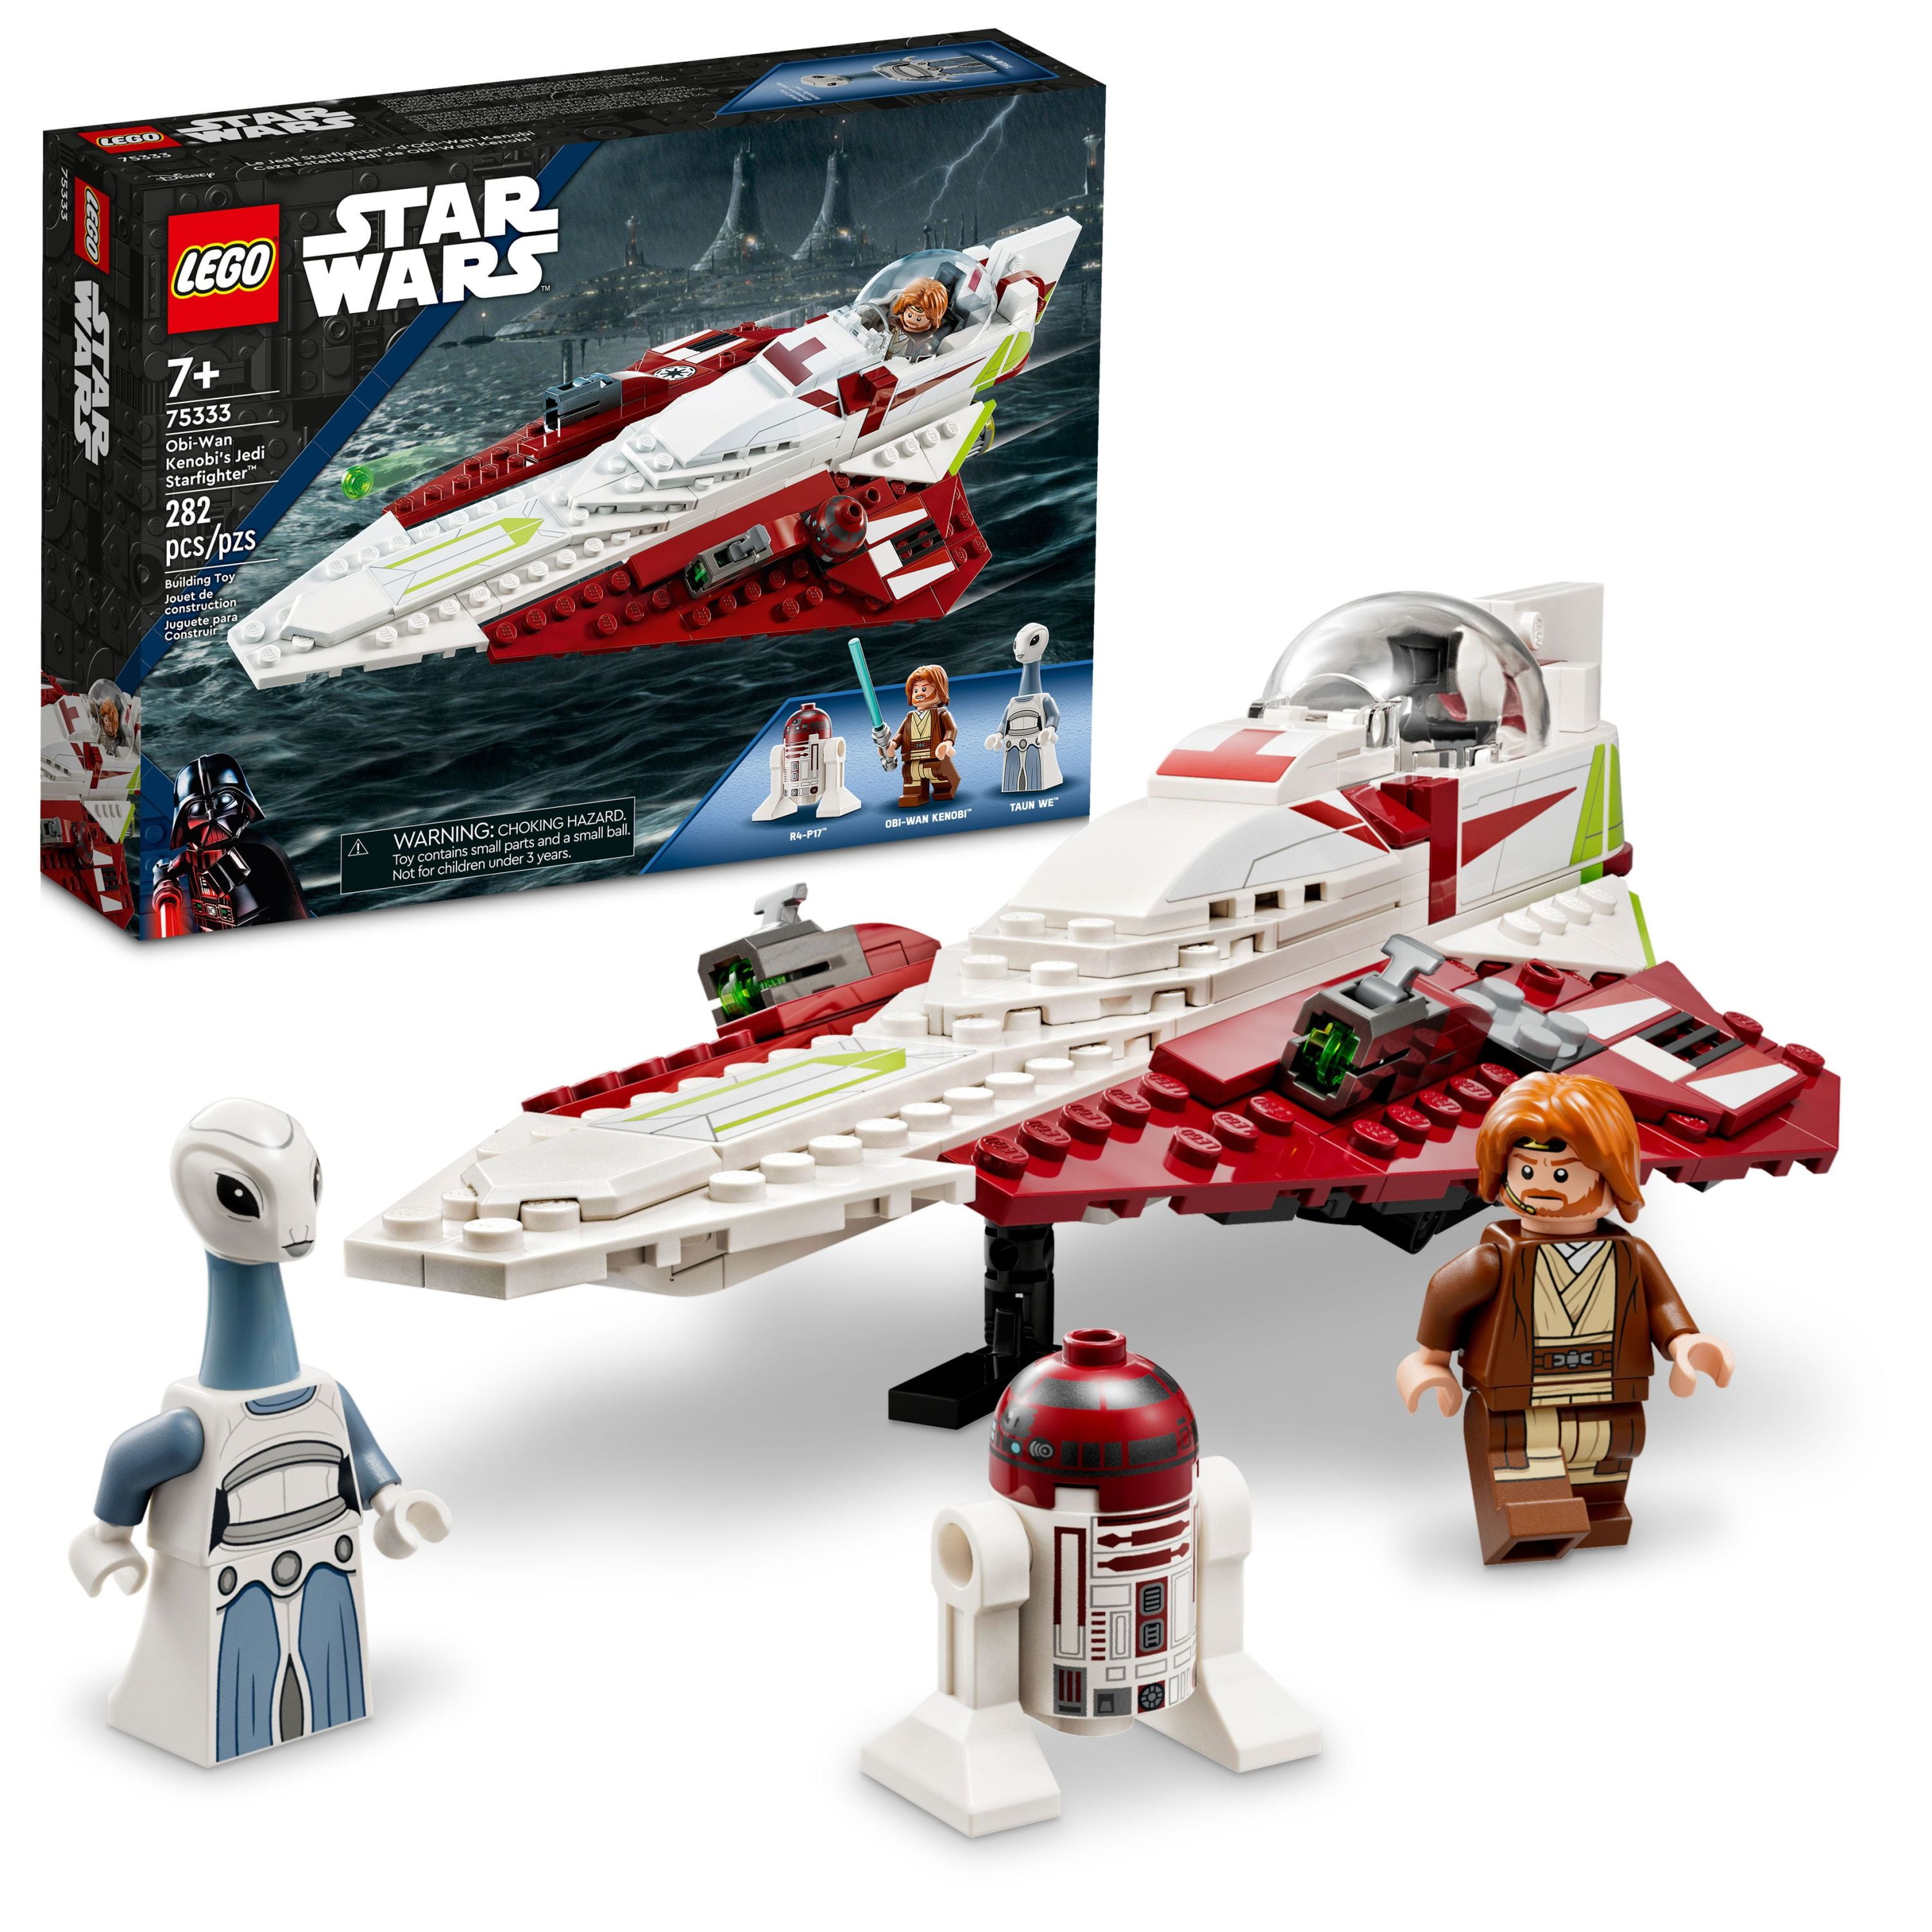 LEGO Star Wars Obi-Wan Kenobi's Jedi Starfighter 75333, Buildable Toy with Taun We Minifigure, Droid Figure and Lightsaber, Attack of the Set Walmart.com